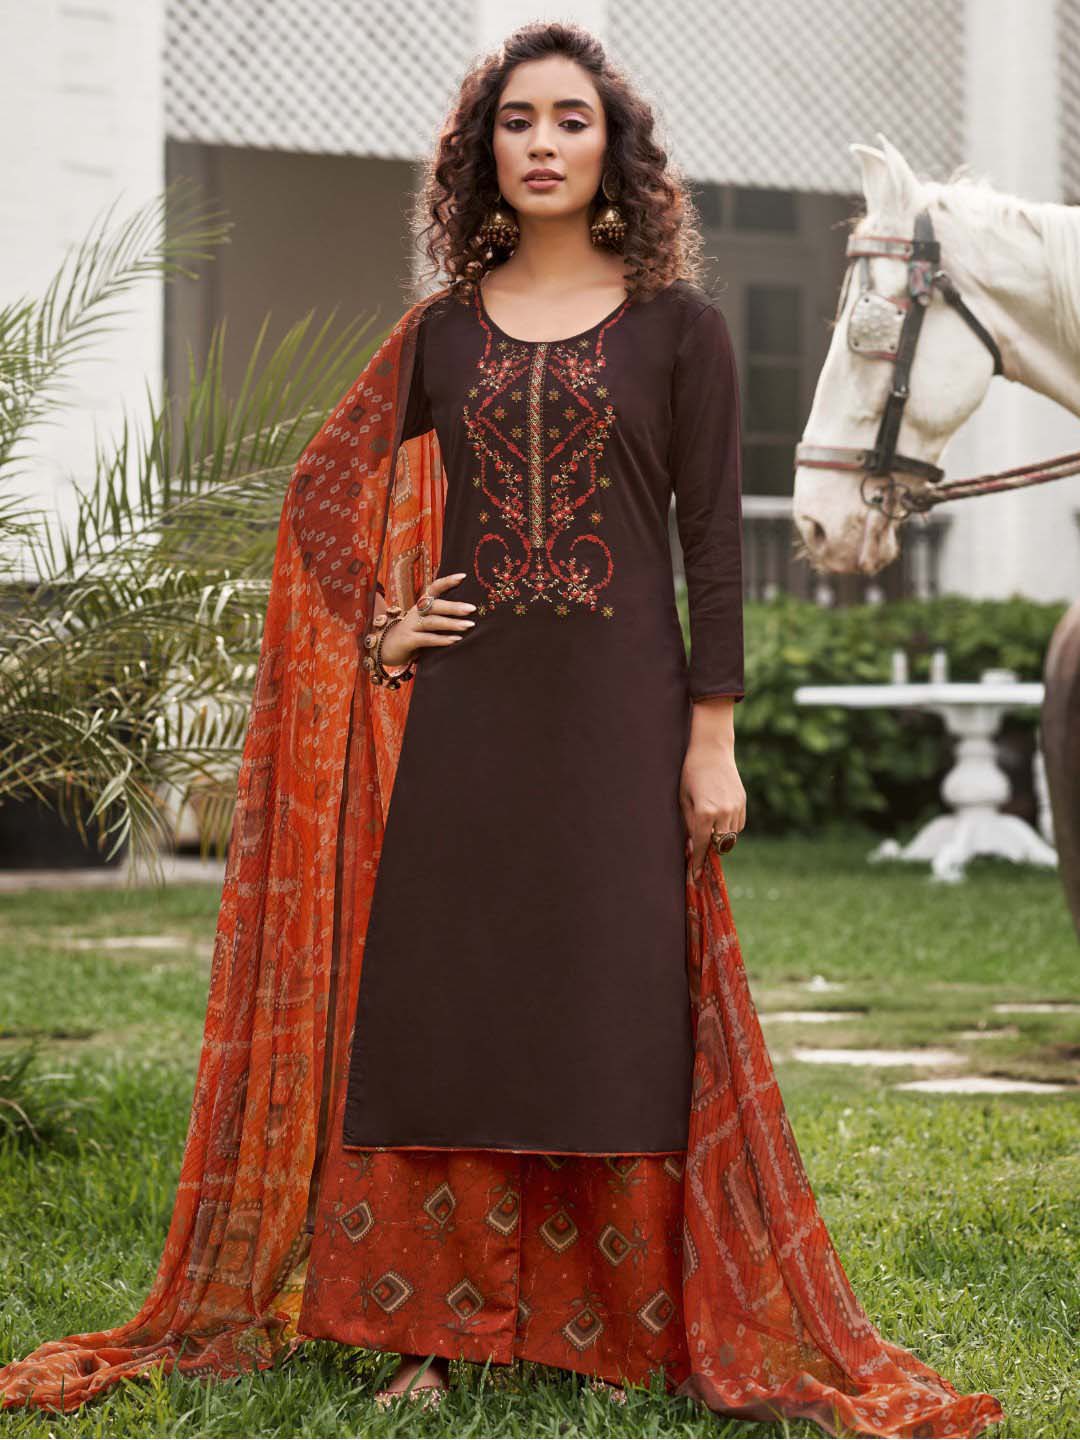 Women Unstitched Cotton Salwar Suit Dress Material with Embroidery